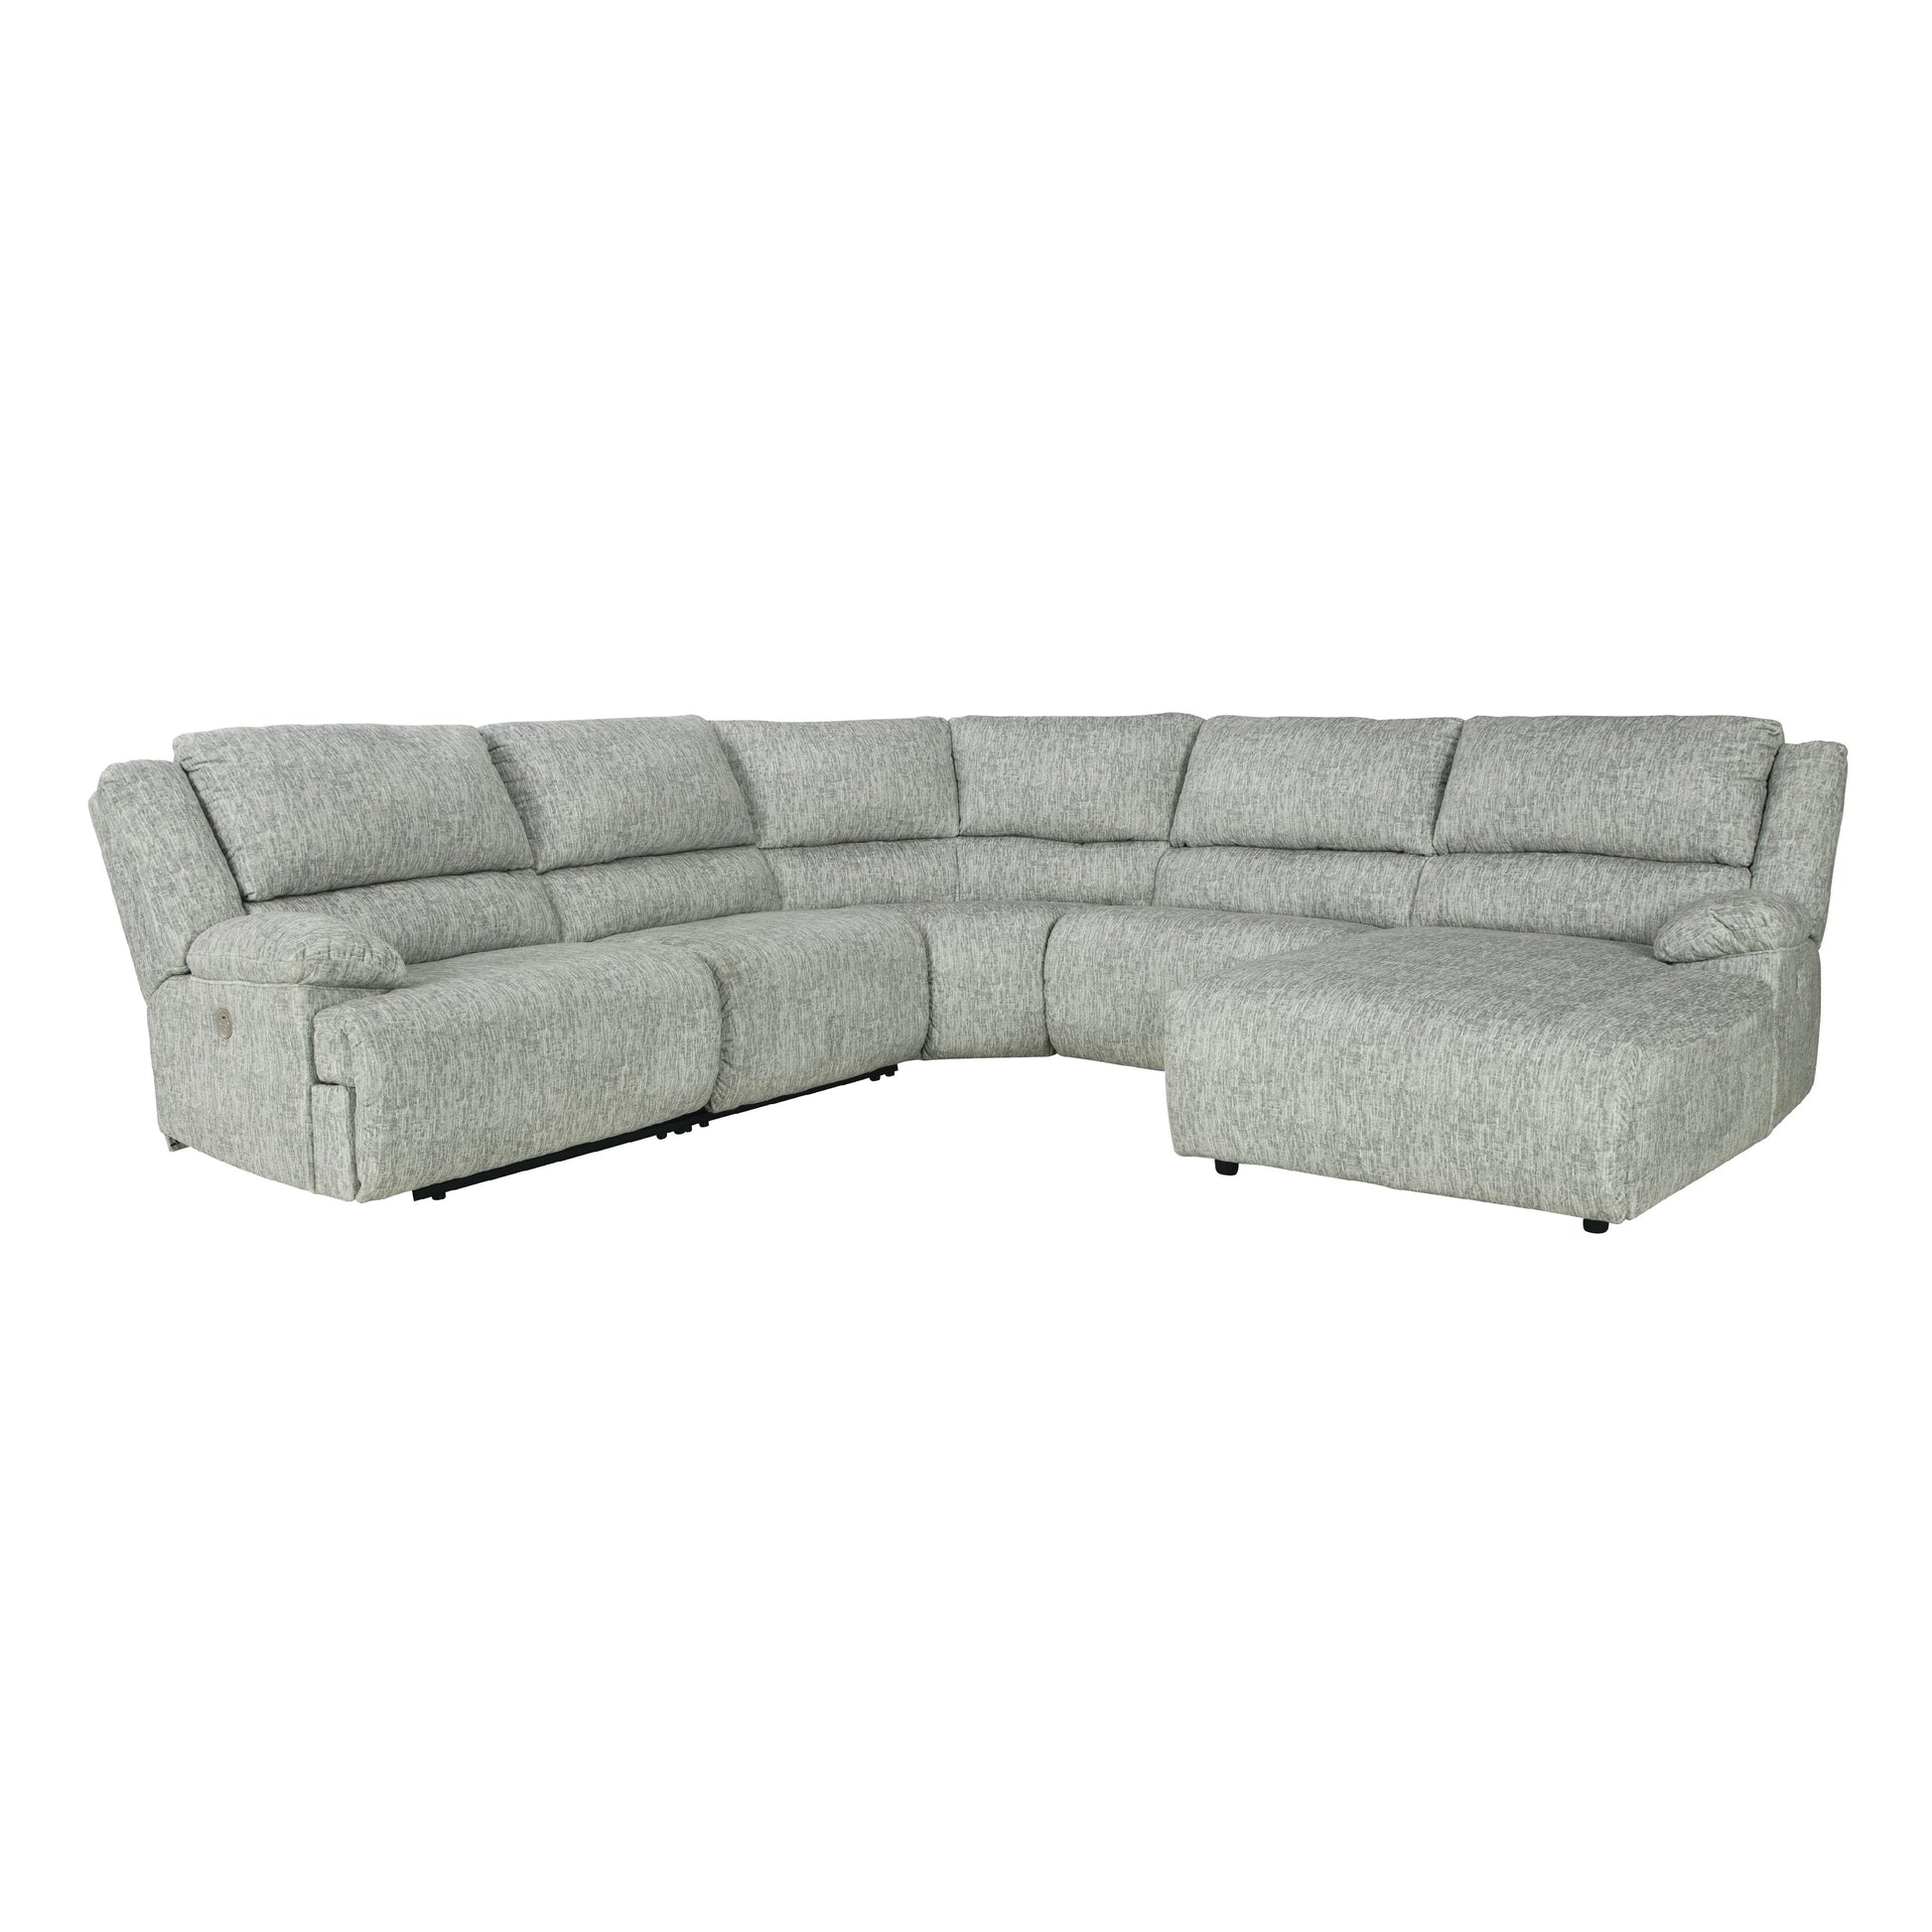 Signature Design by Ashley McClelland Power Reclining Fabric 5 pc Sectional 2930258/2930219/2930277/2930246/2930297 IMAGE 1